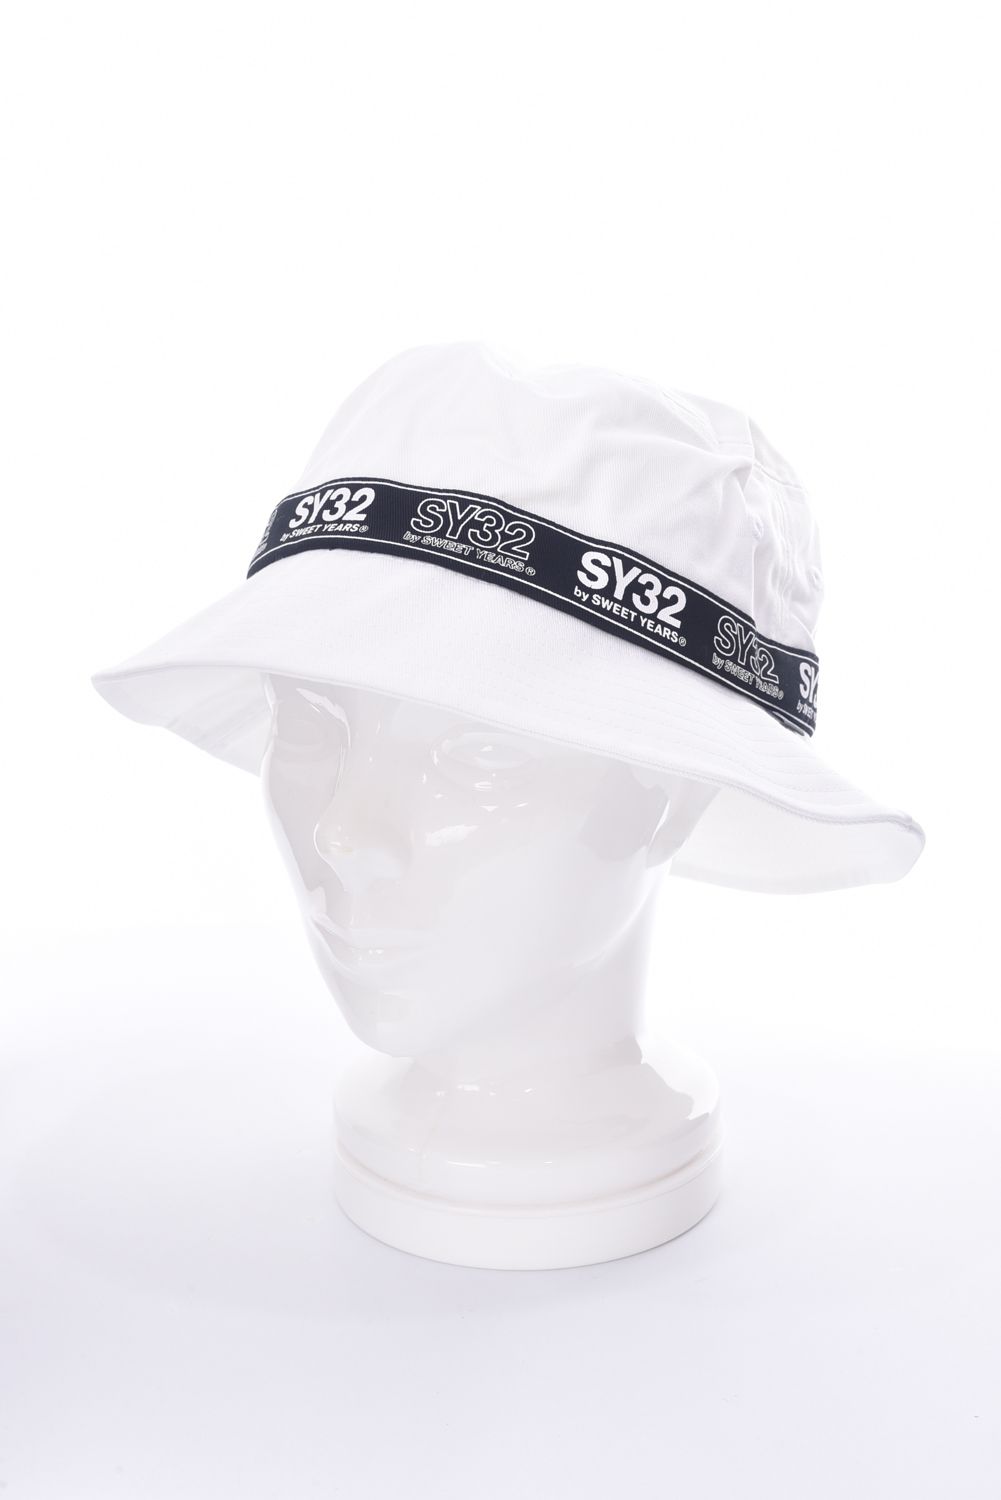 SY32 by SWEET YEARS GOLF - TAPE LOGO BUCKET HAT / ロゴラインテープ